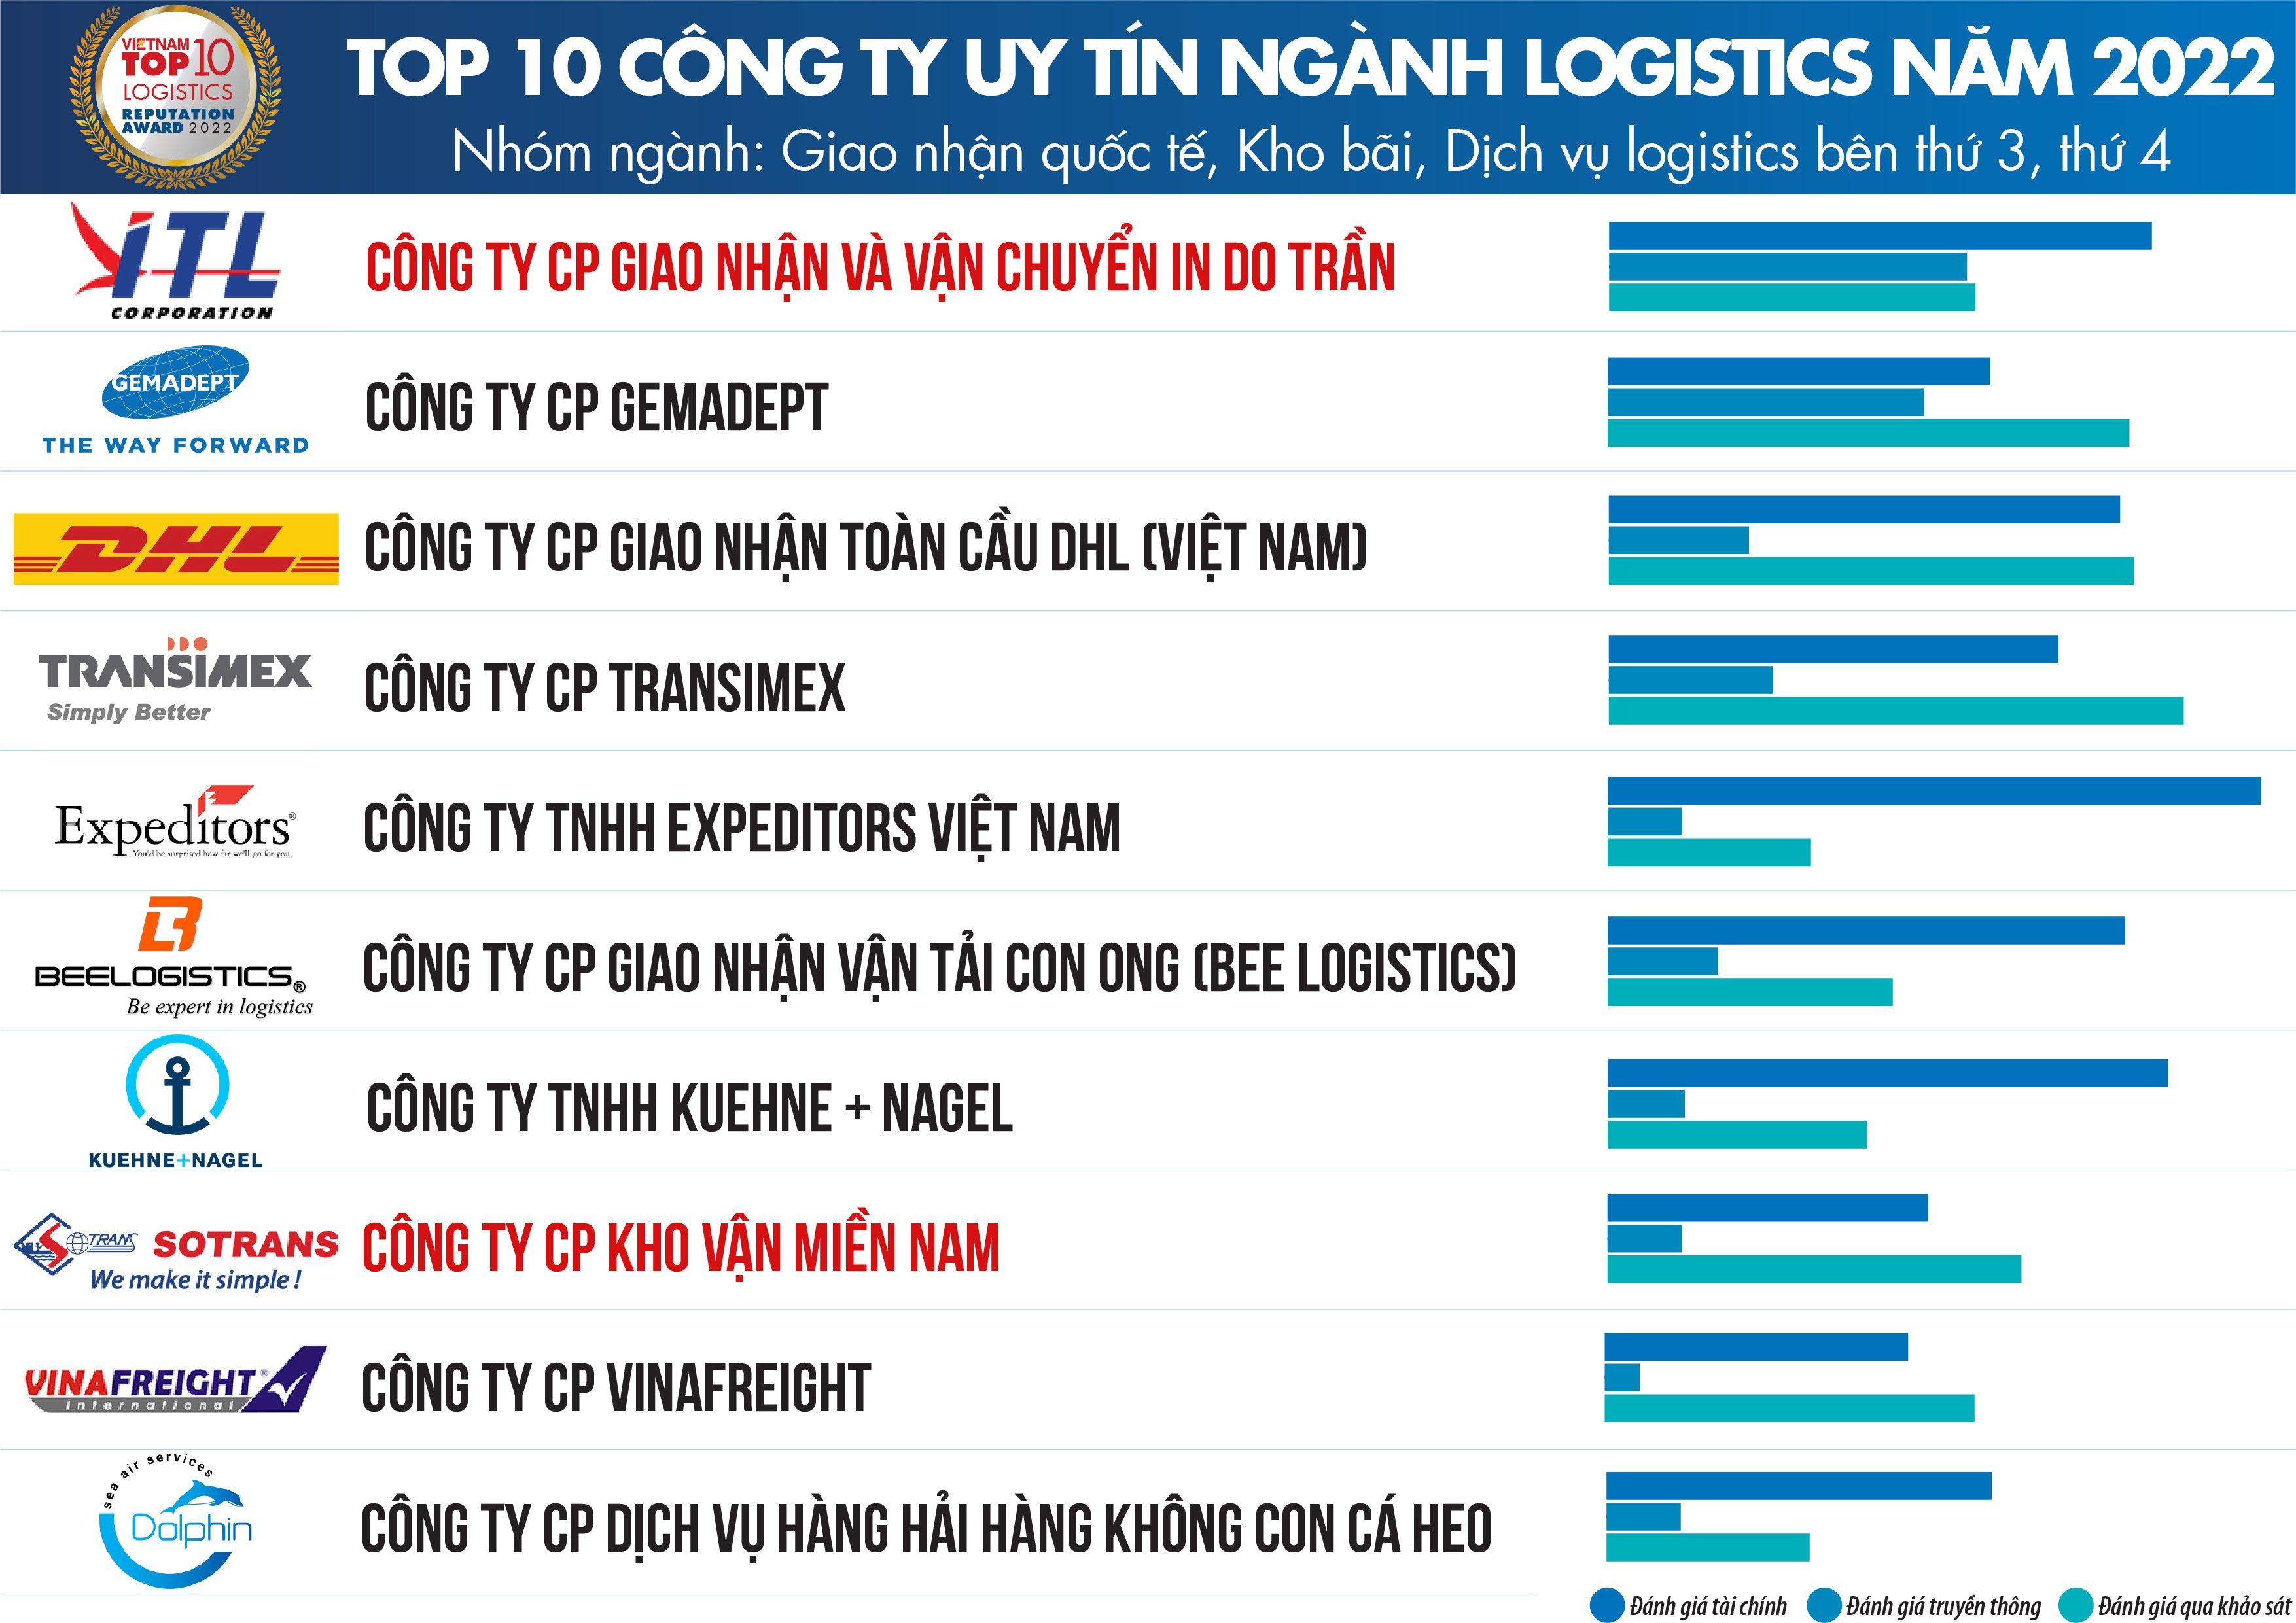 SOTRANS Group Wins “Top 10 Most Reputable Logistics Companies 2022”